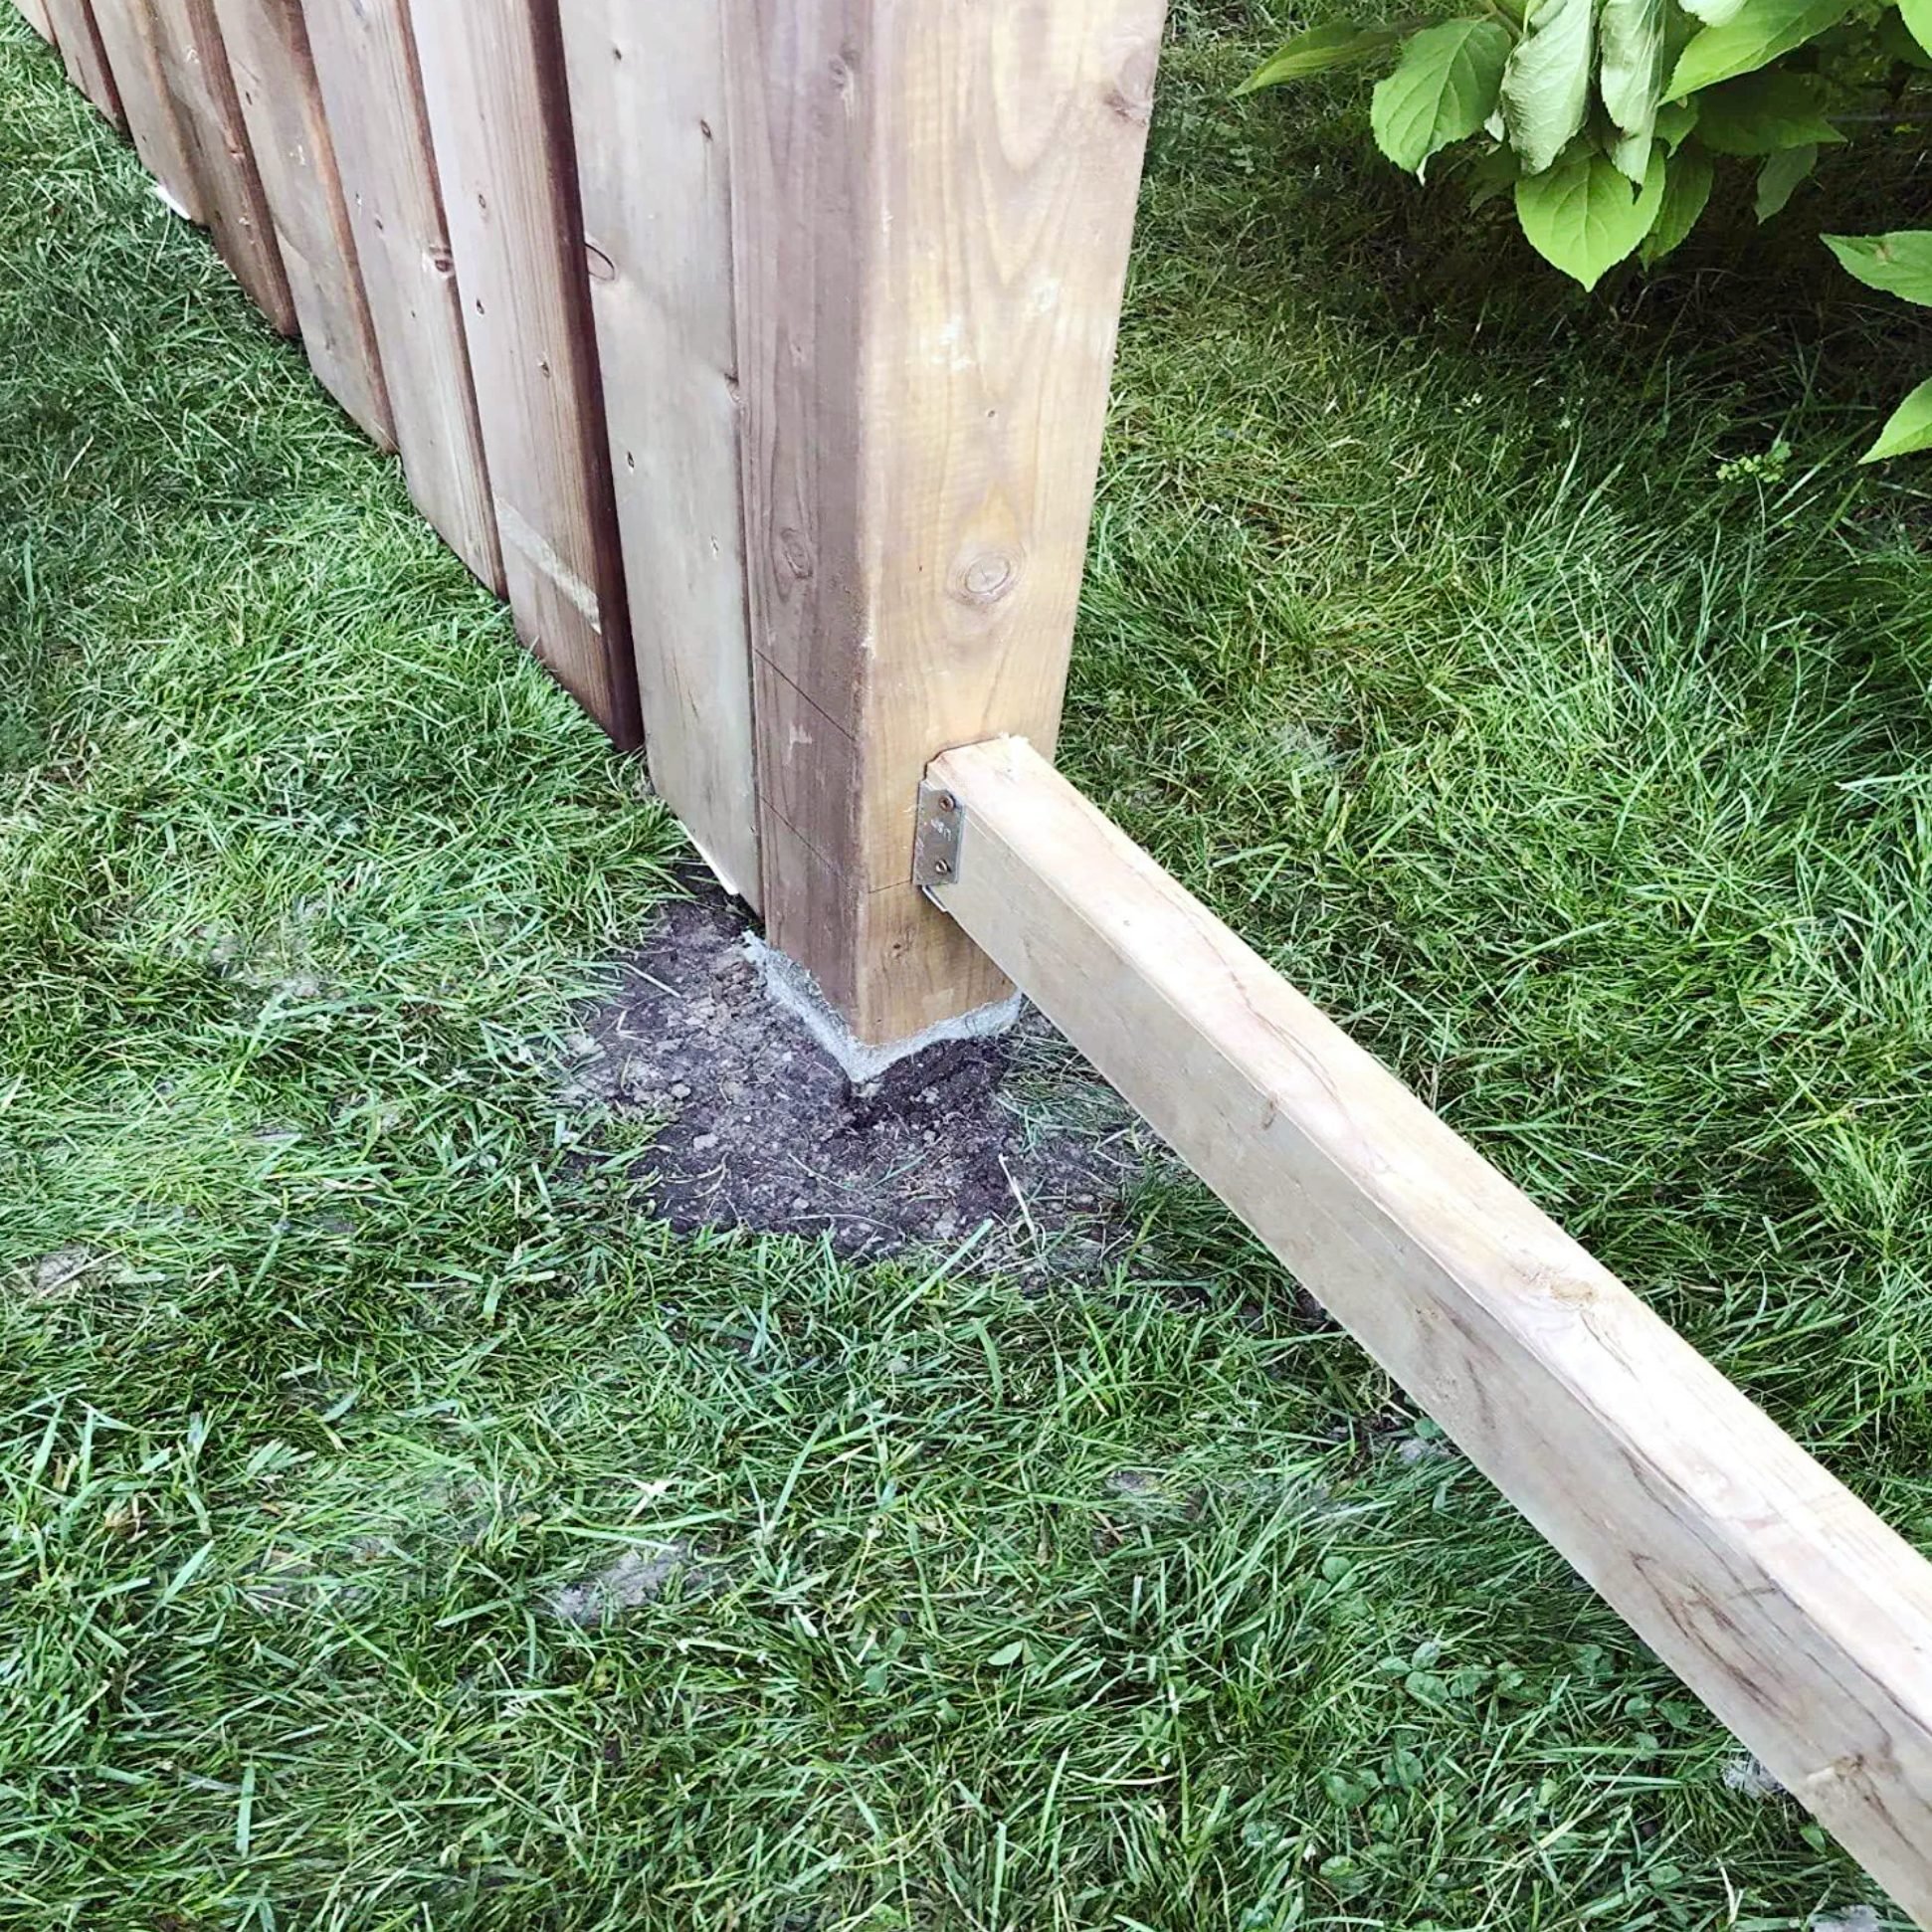 Should You Use Expanding Foam for Setting Fence Posts?